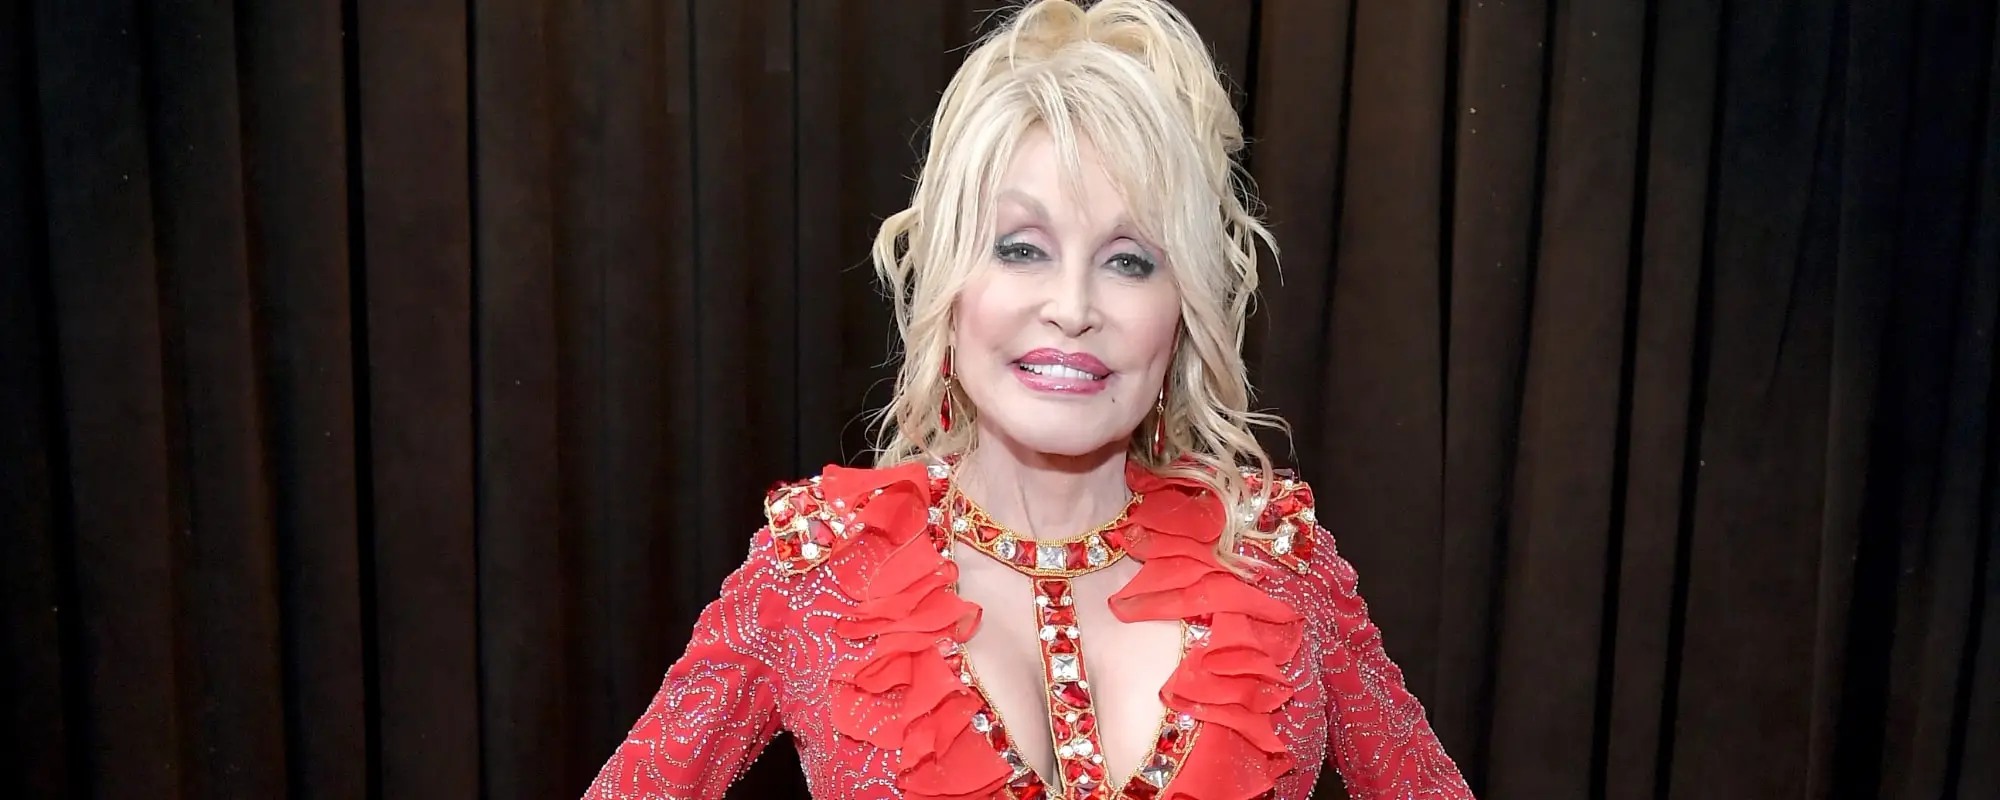 Look: Dolly Parton Shares Her Passion for Christmas Fashion With Festive Throwback Photos